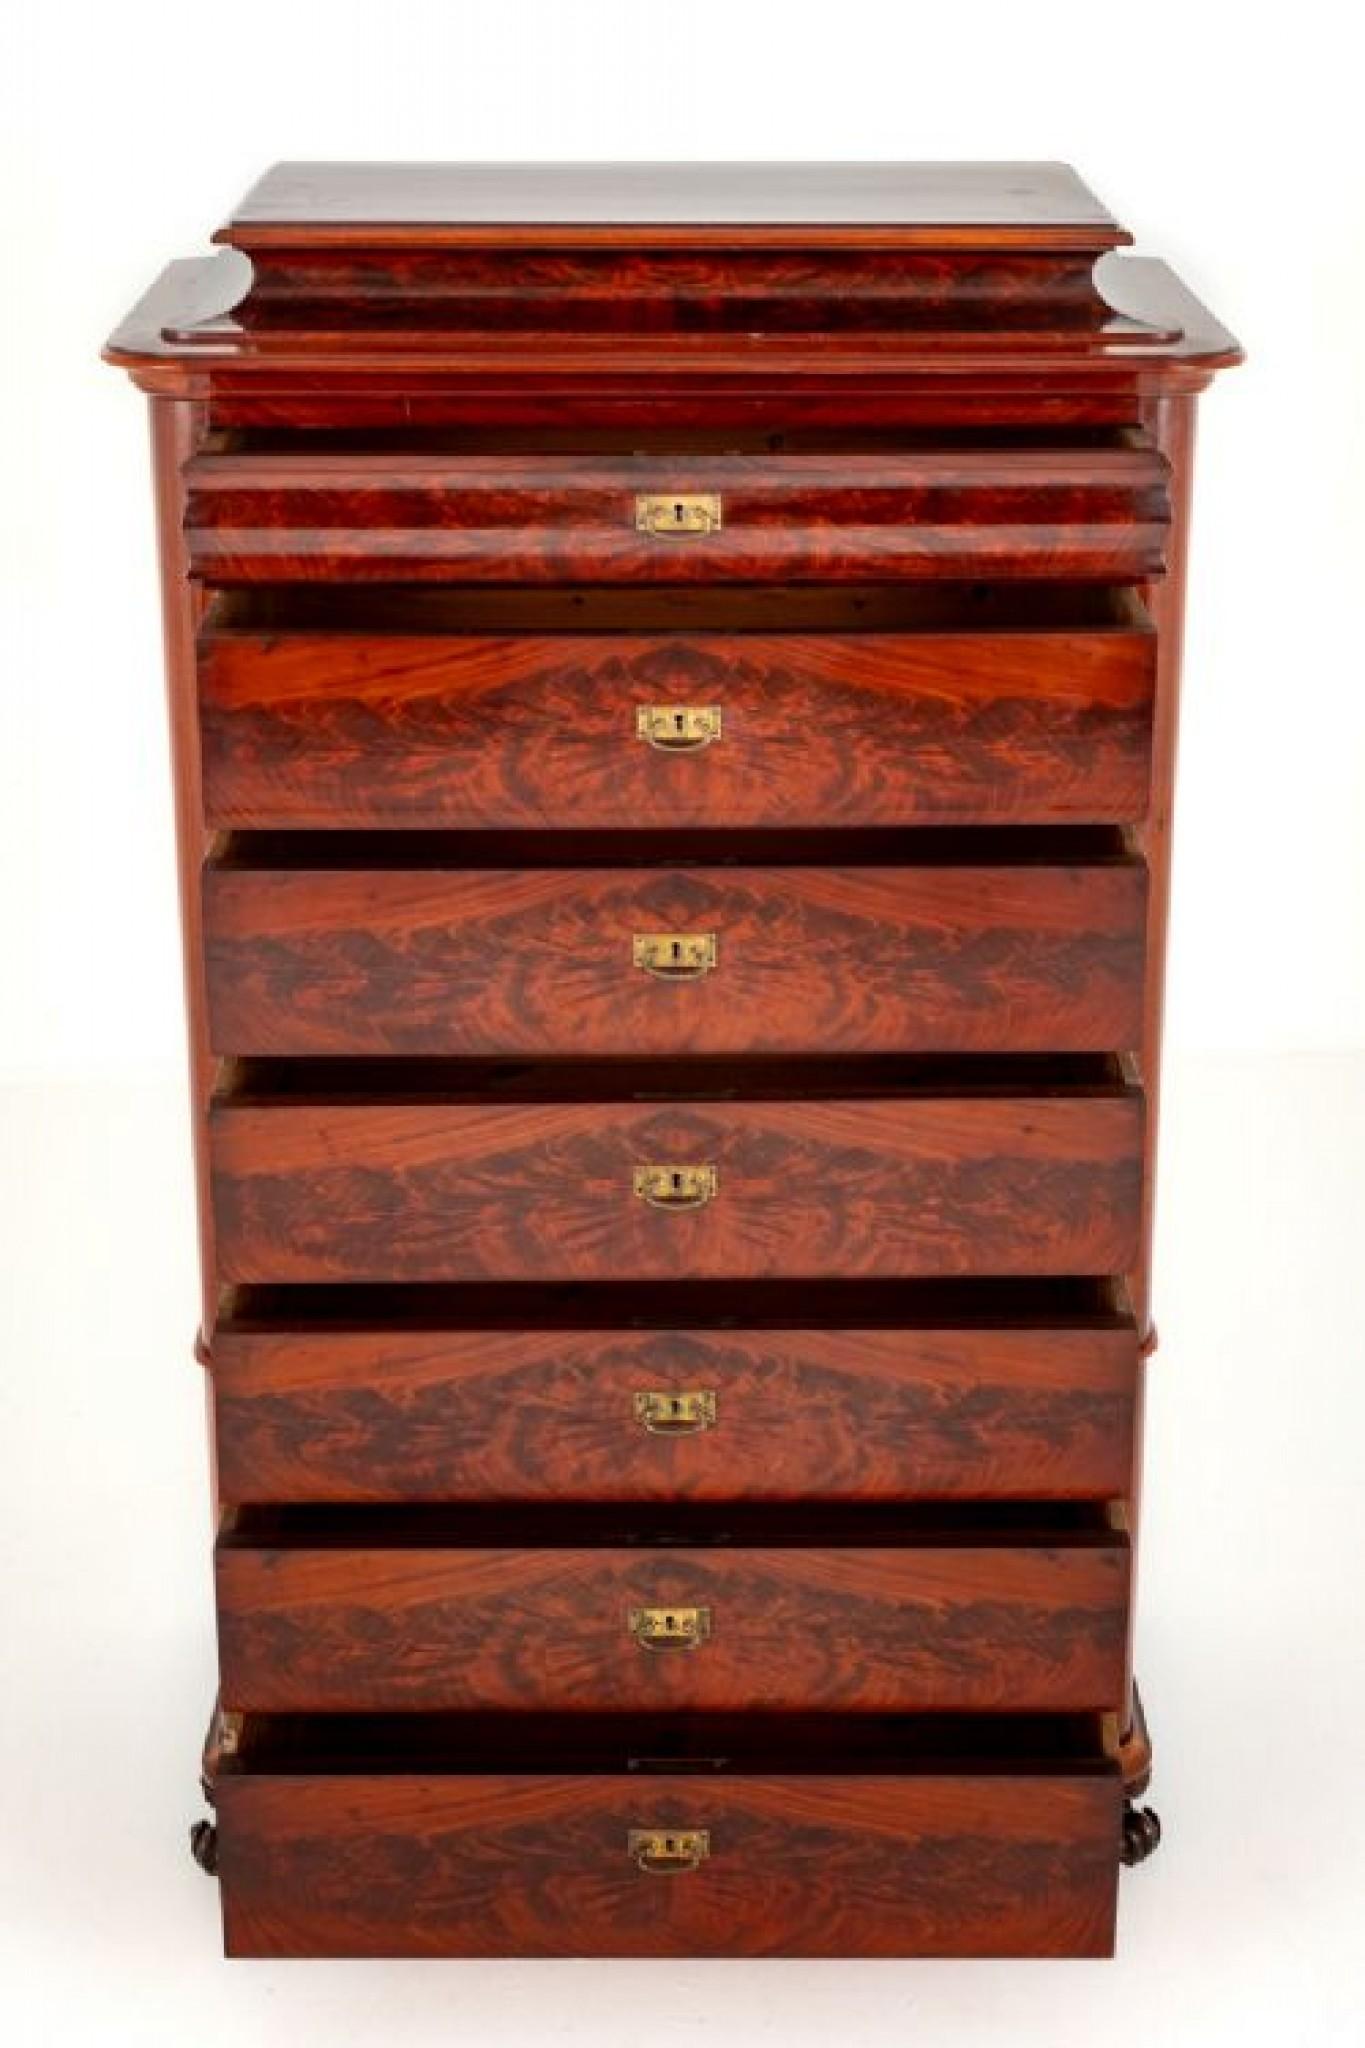 Quality French Mahogany Chest of Drawers or semanier
This Chest of Drawers Features 7 Graduated Drawers
With the seven drawers there is one for each day of the week and hence it's a semanier
Circa 1860
Each Drawer Having the Most Wonderful Flame